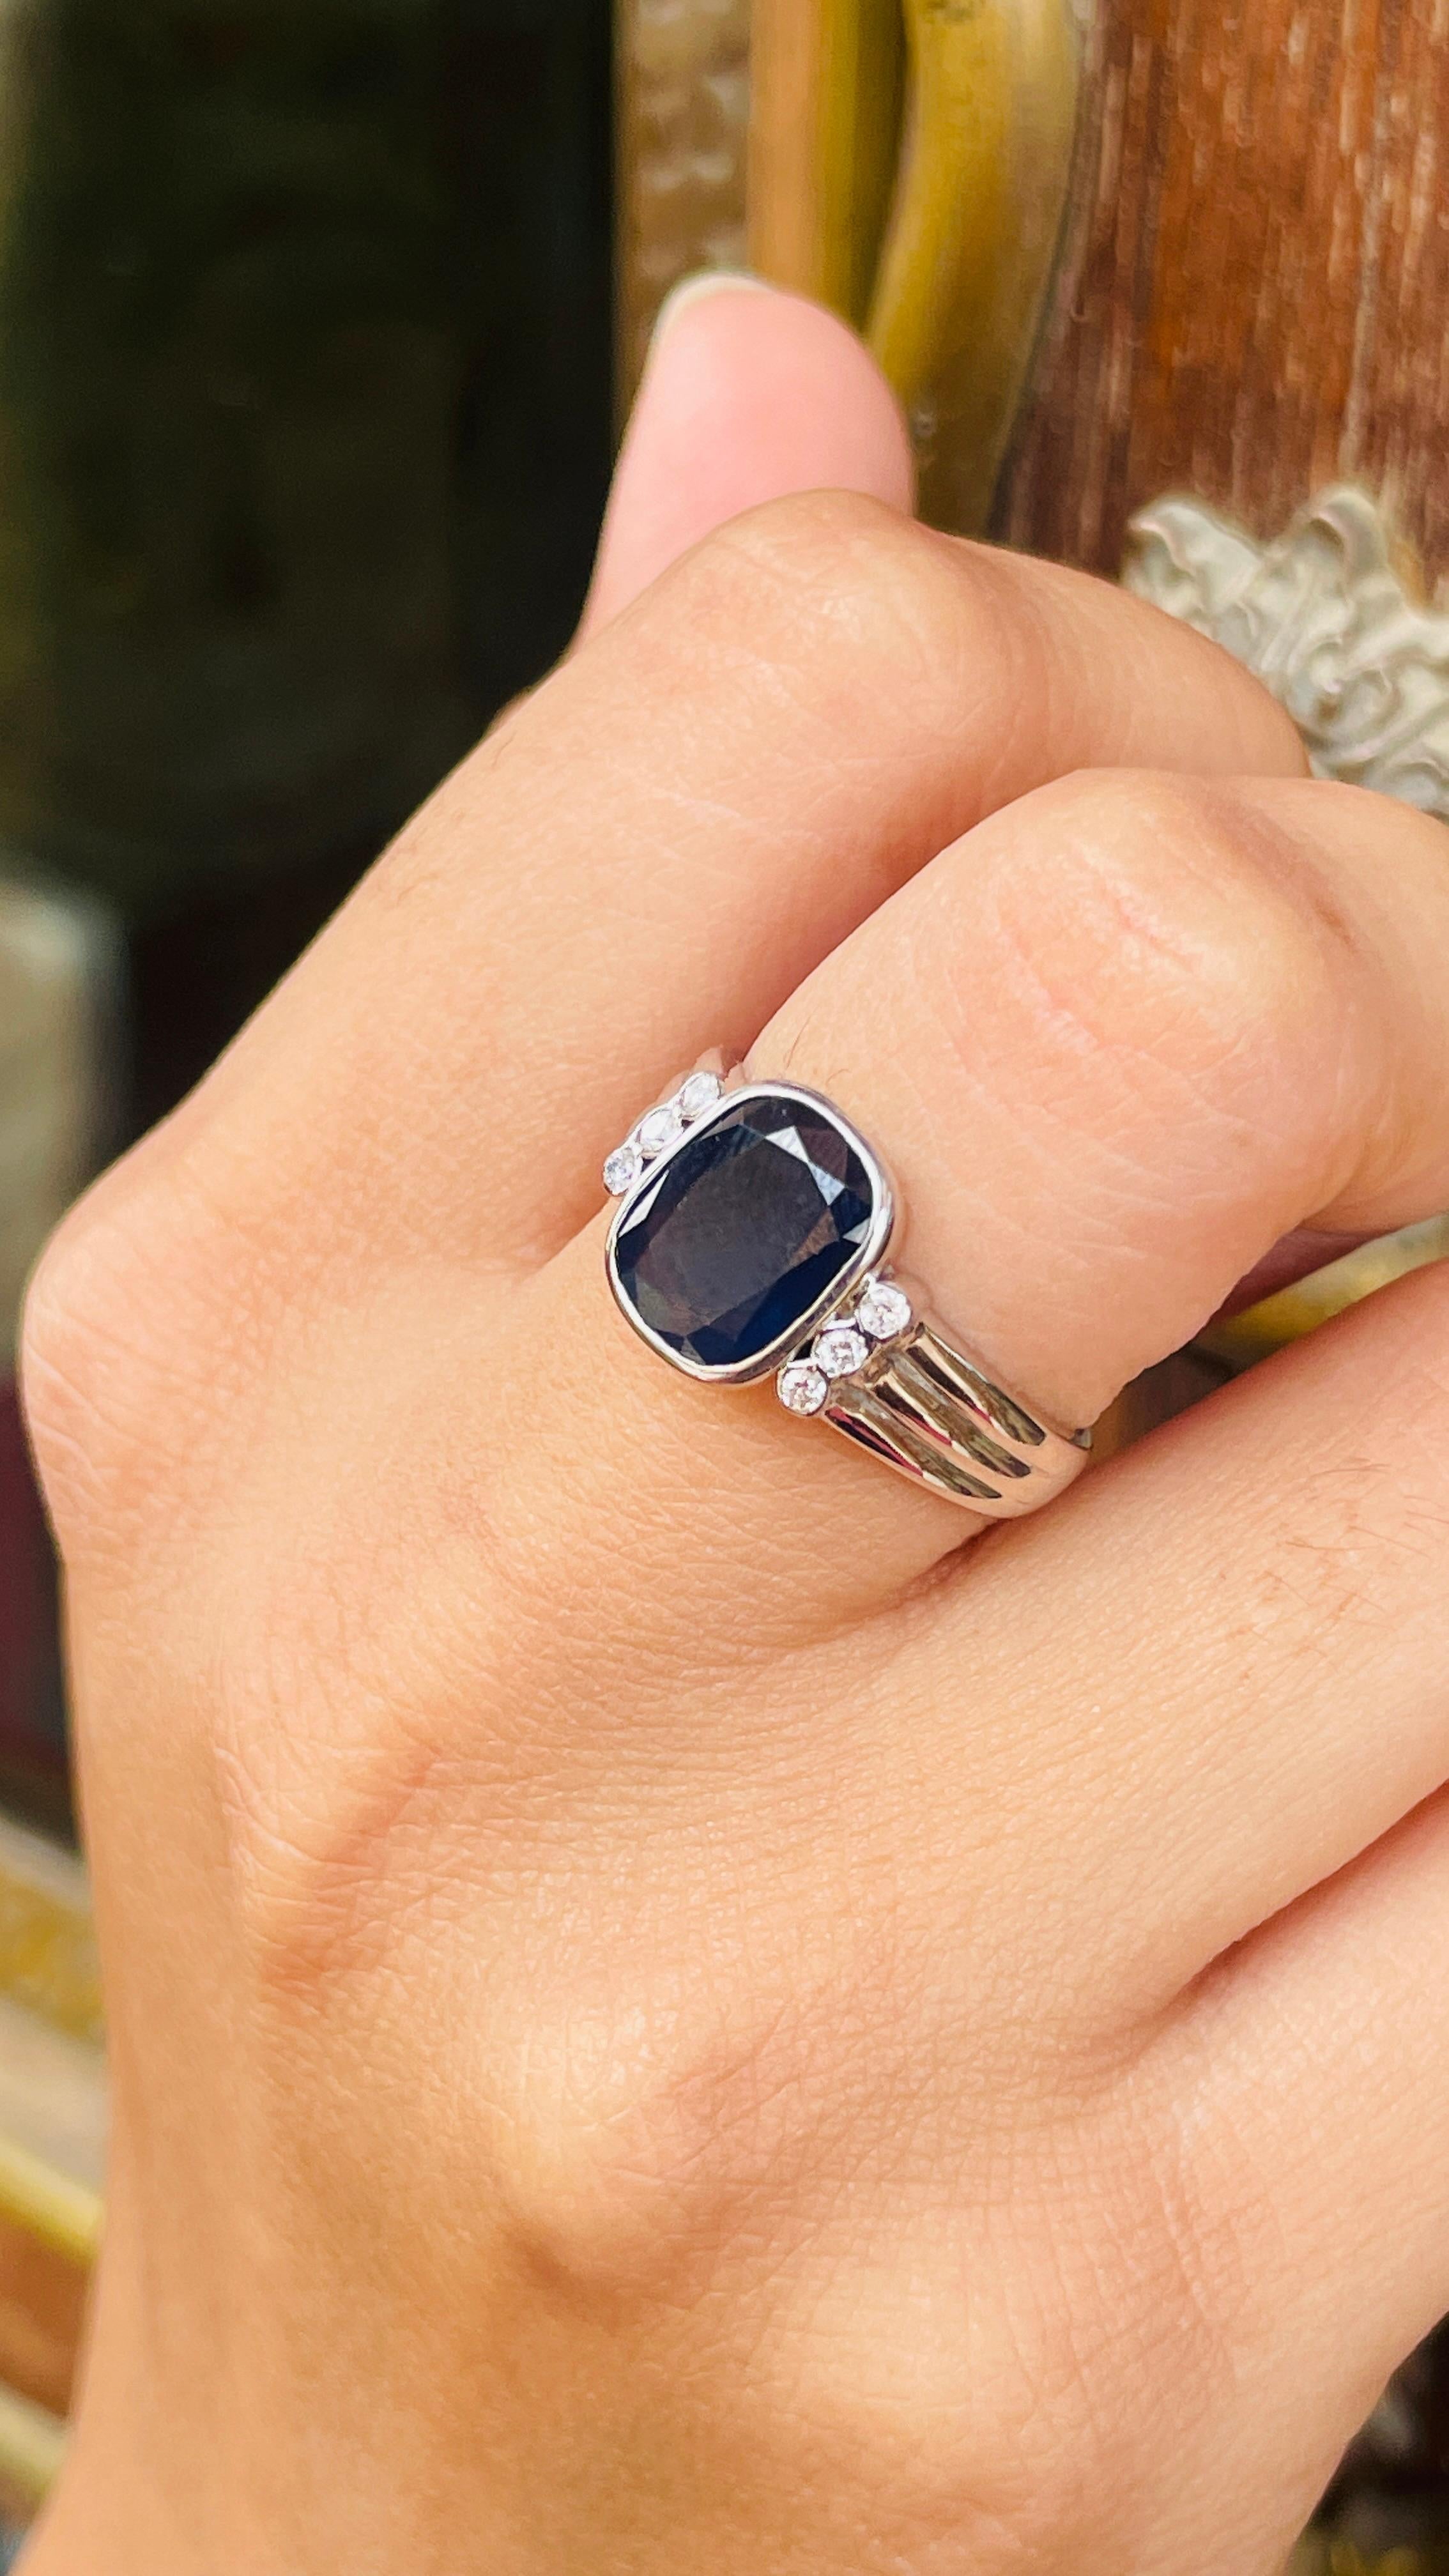 Blue Sapphire Ring with Diamonds in 18k Gold featuring natural sapphire of 2.74 carats and diamonds of 0.12 carats. The gorgeous handcrafted ring goes with every style.
Sapphire stimulate concentration and reduces stress.
Designed with cushion cut